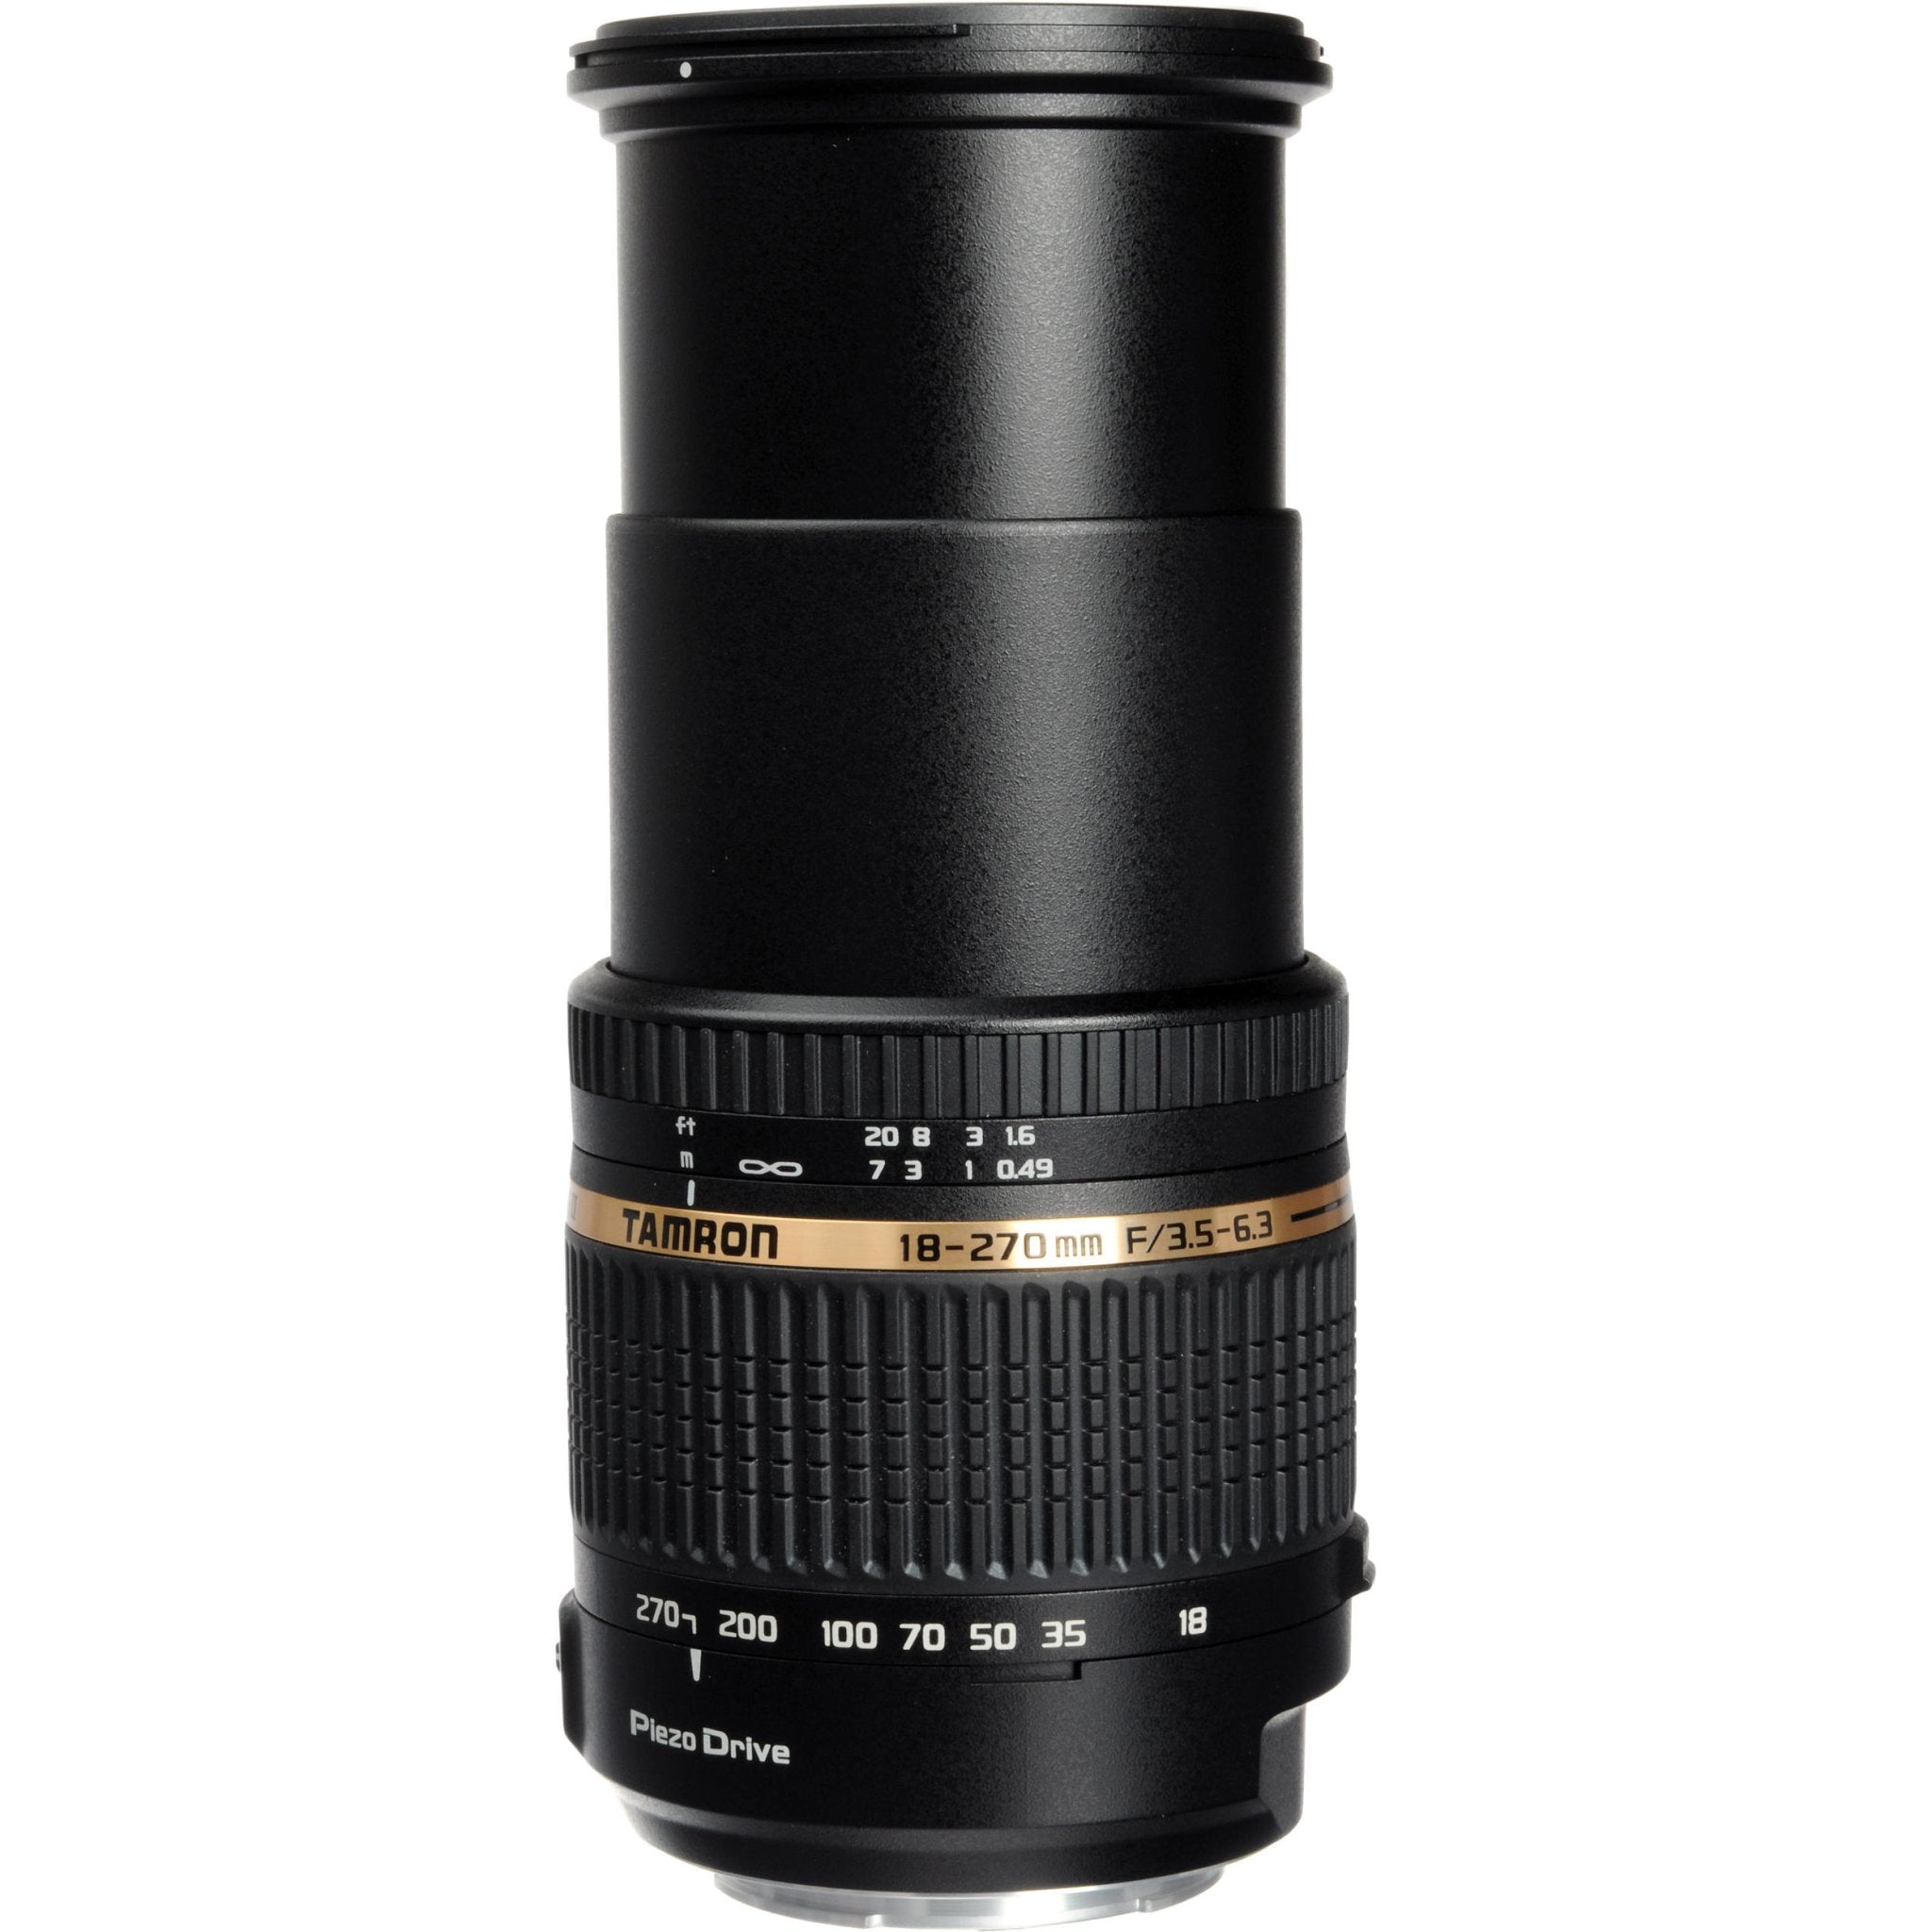 Tamron 18-270mm F/3.5-6.3 Di II PZD Lens for Sony – The Camerashop